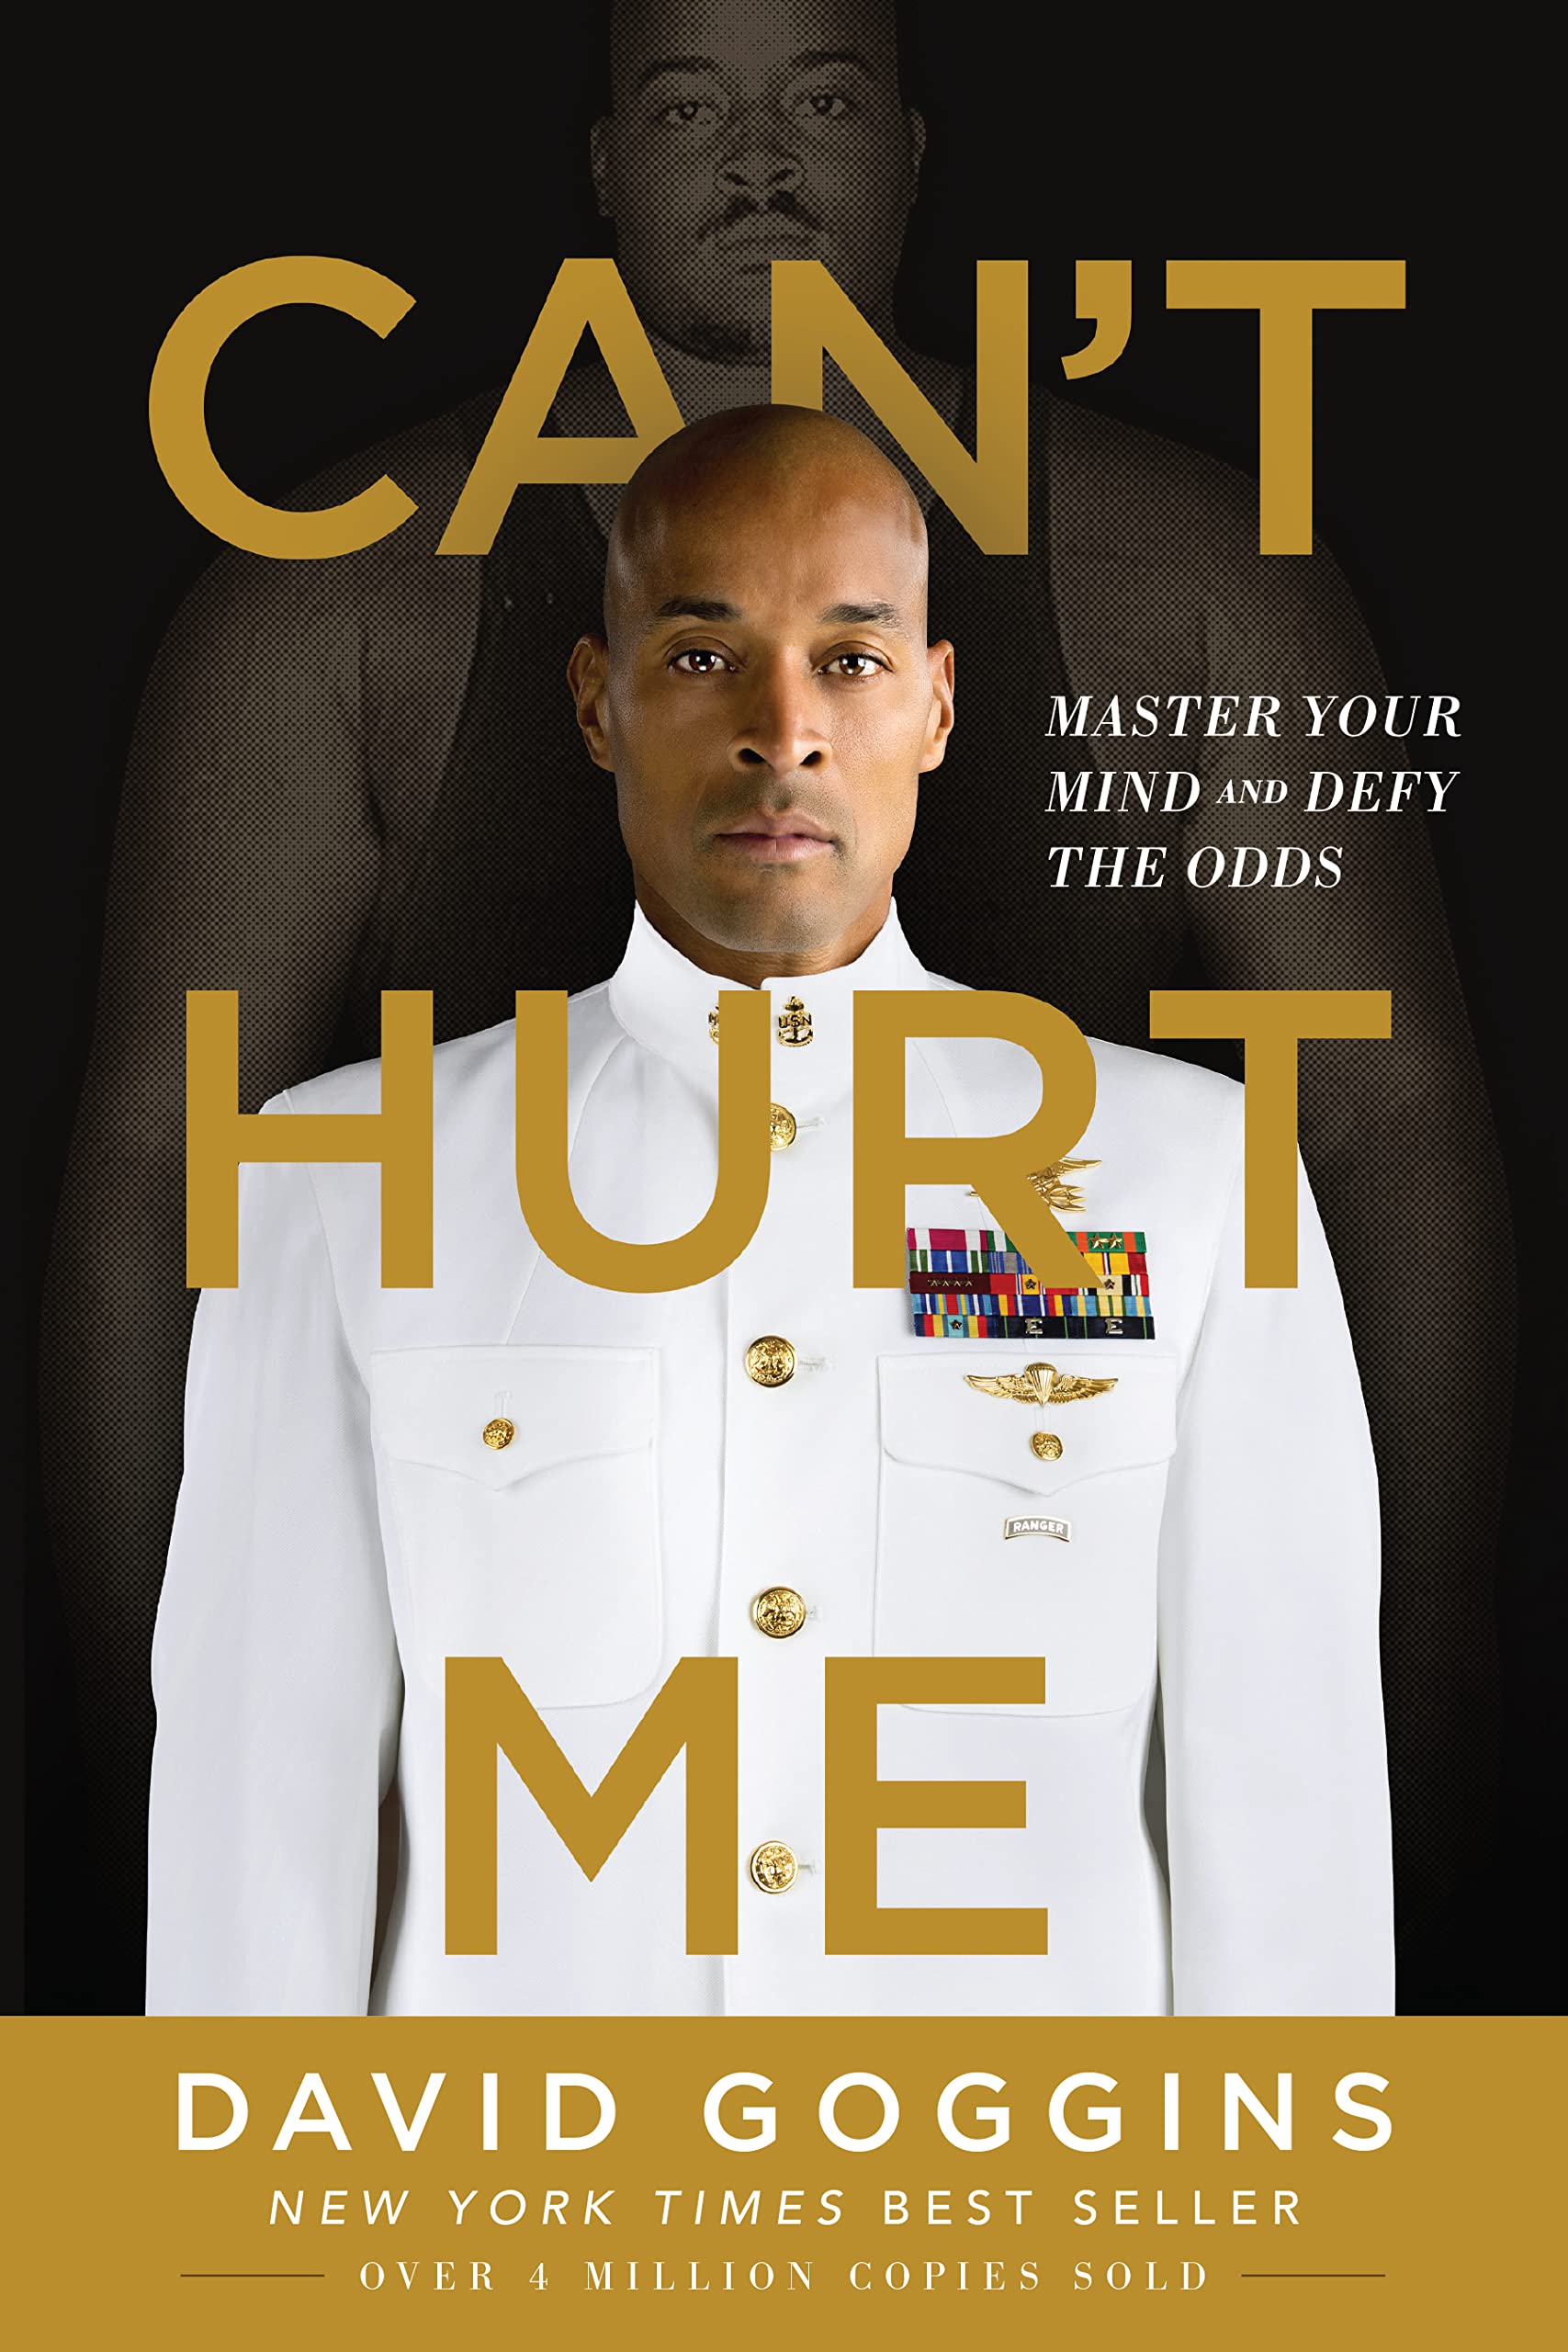 YOU MUST BE OBSESSED, David Goggins 2022